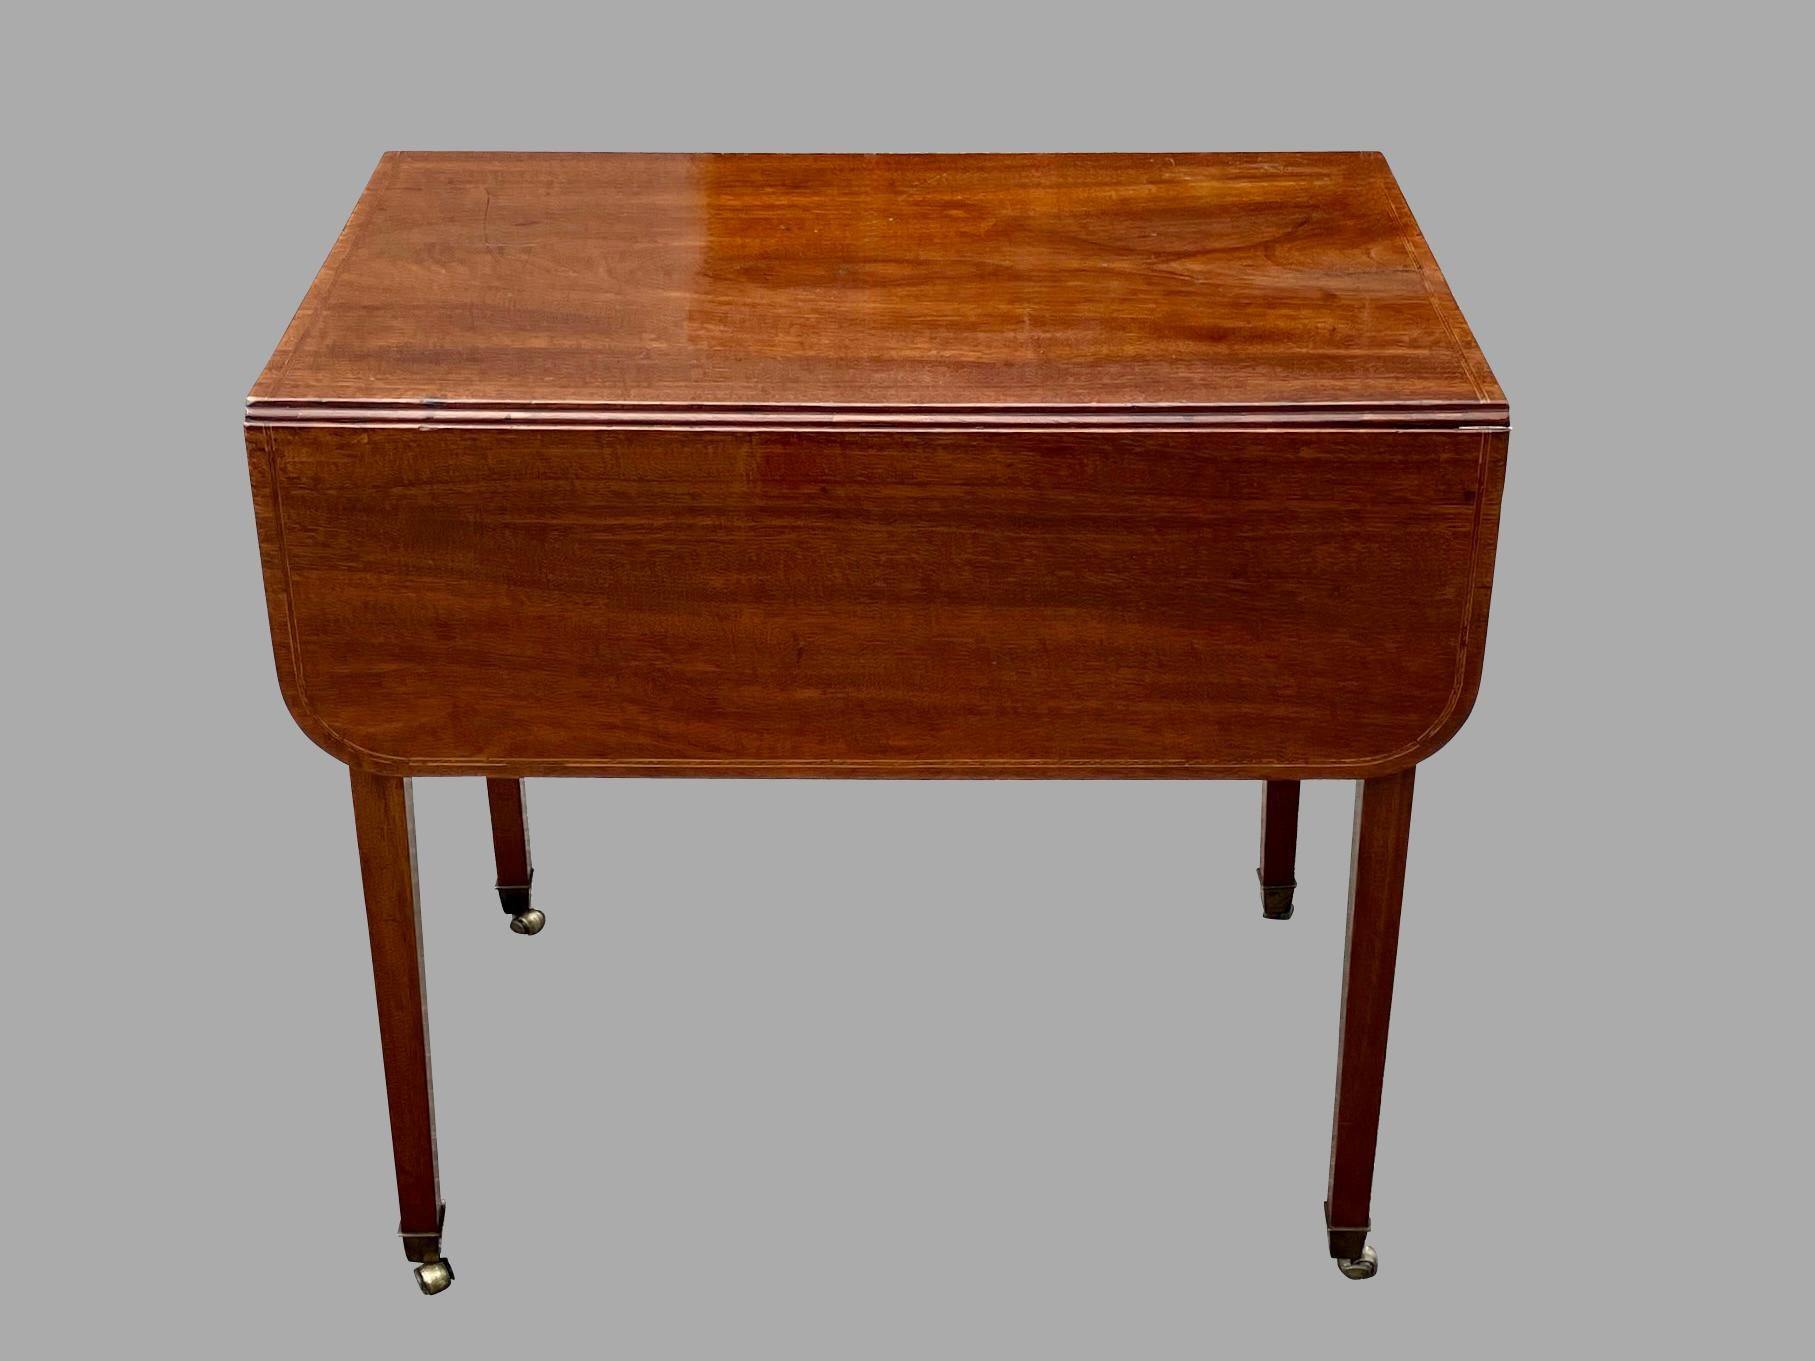 English Rectangular Georgian Period Mahogany Pembroke Table with Single Drawer For Sale 1